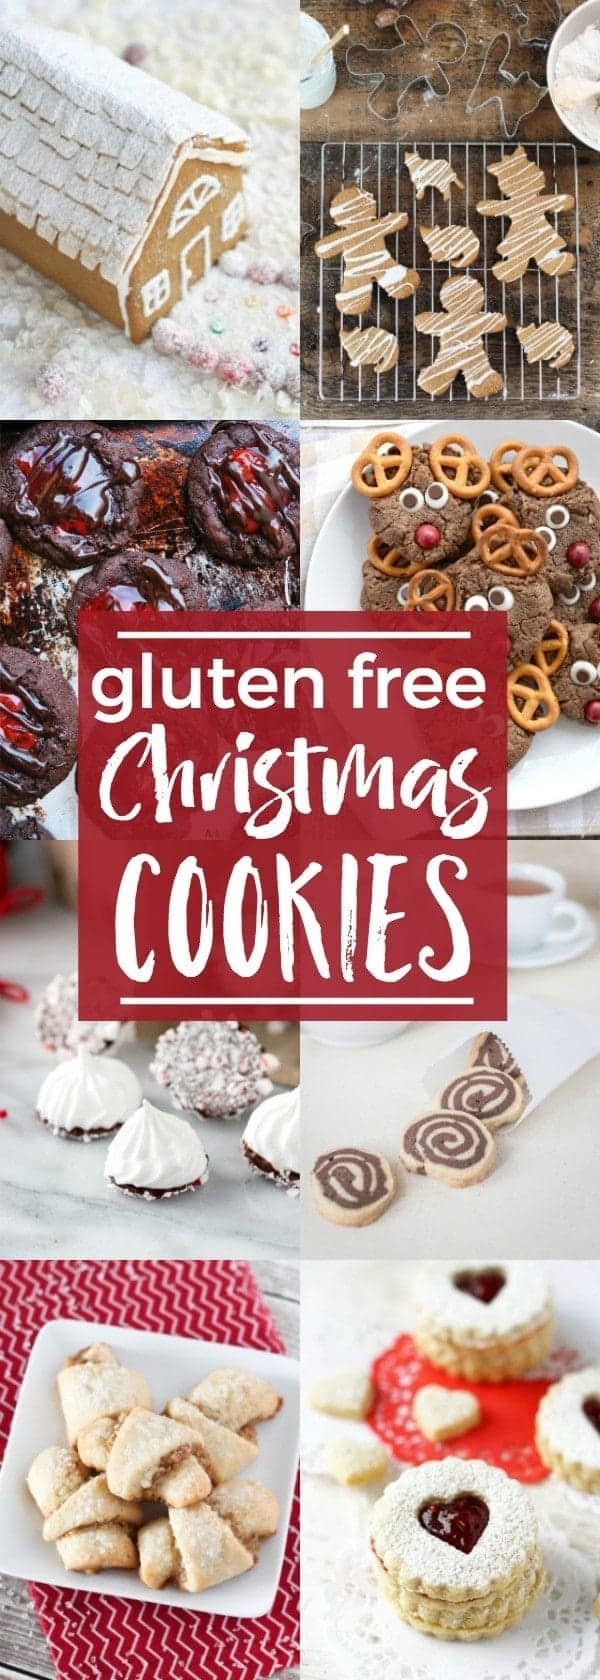 Gluten Free Christmas Cookies
 Gluten Free Christmas Cookies What the Fork